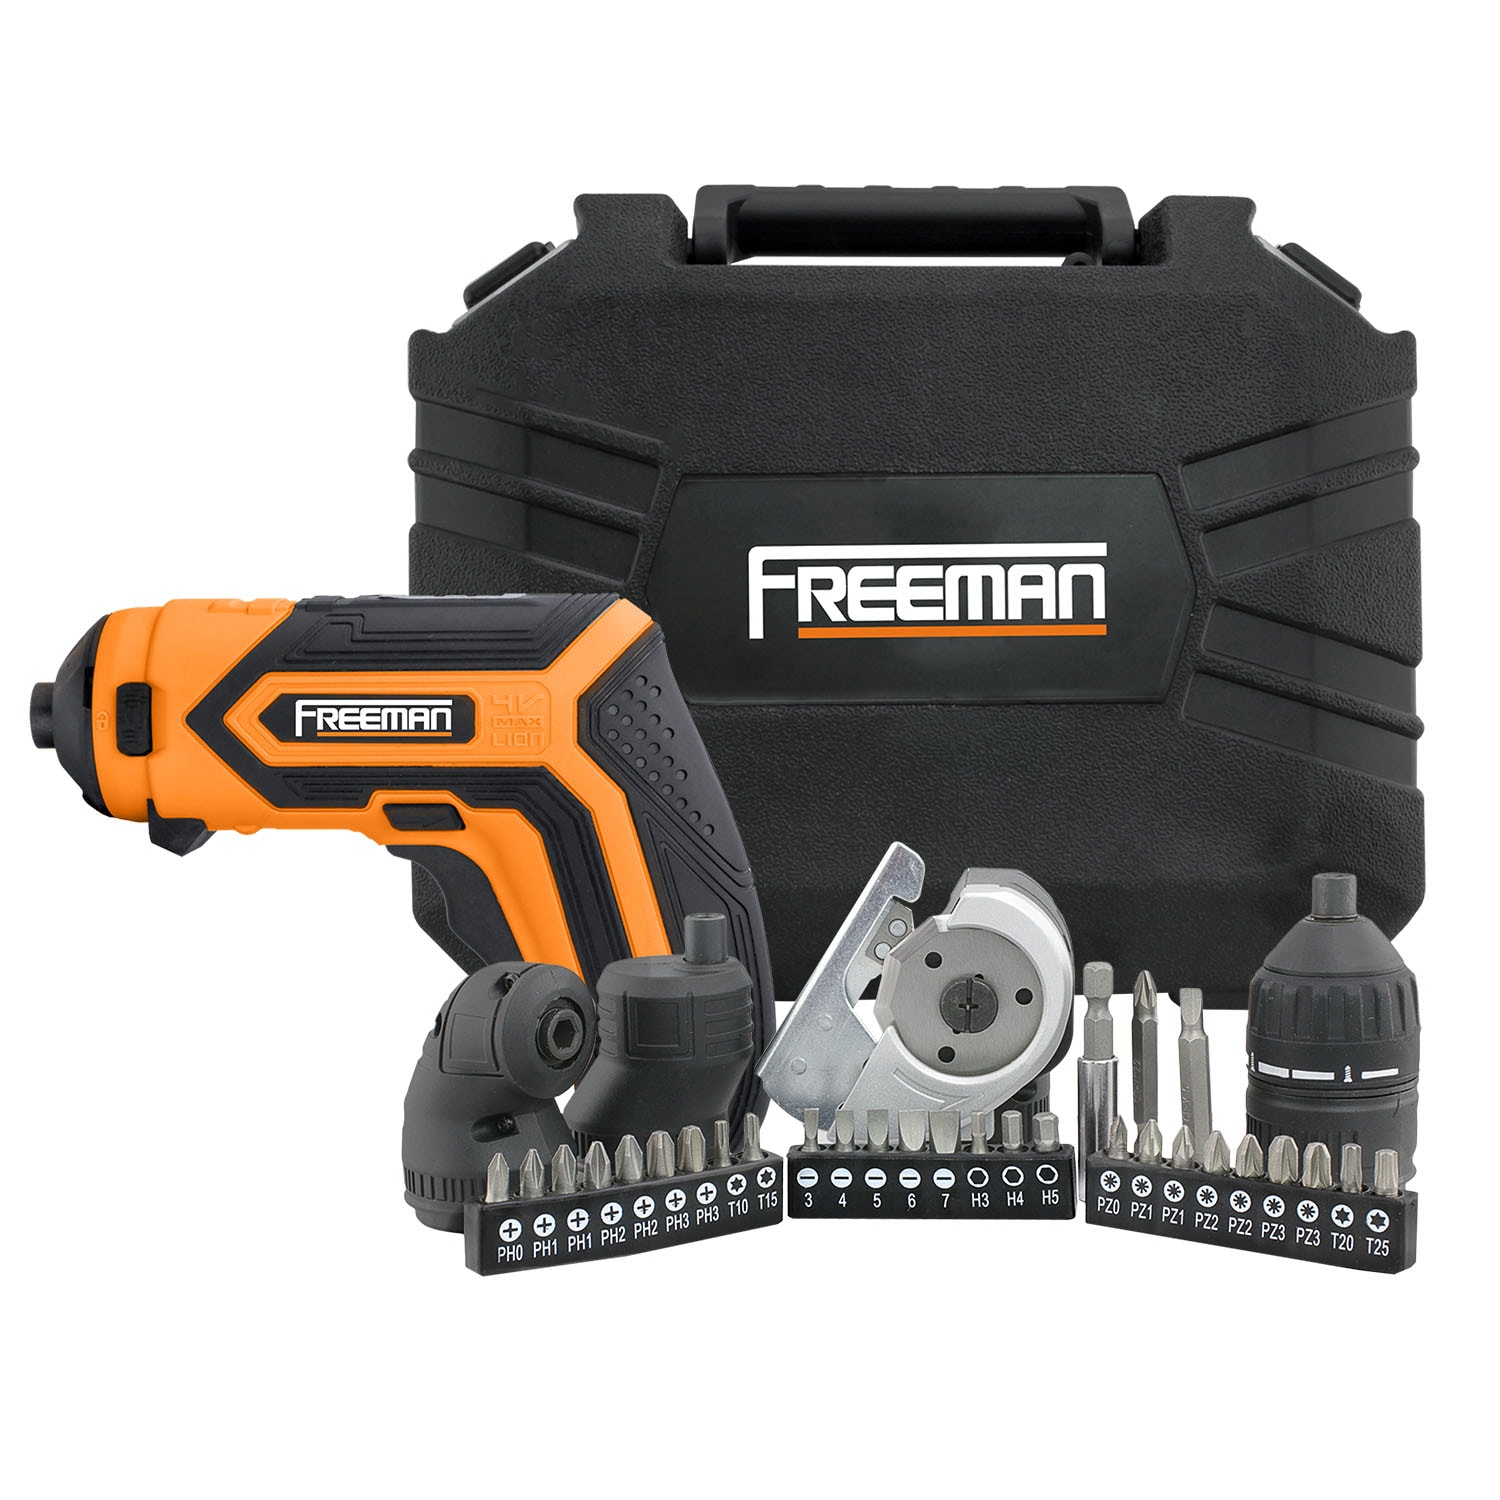 FREEMAN Interchangeable Attachments, Hex Bits, and Case 5-in-1